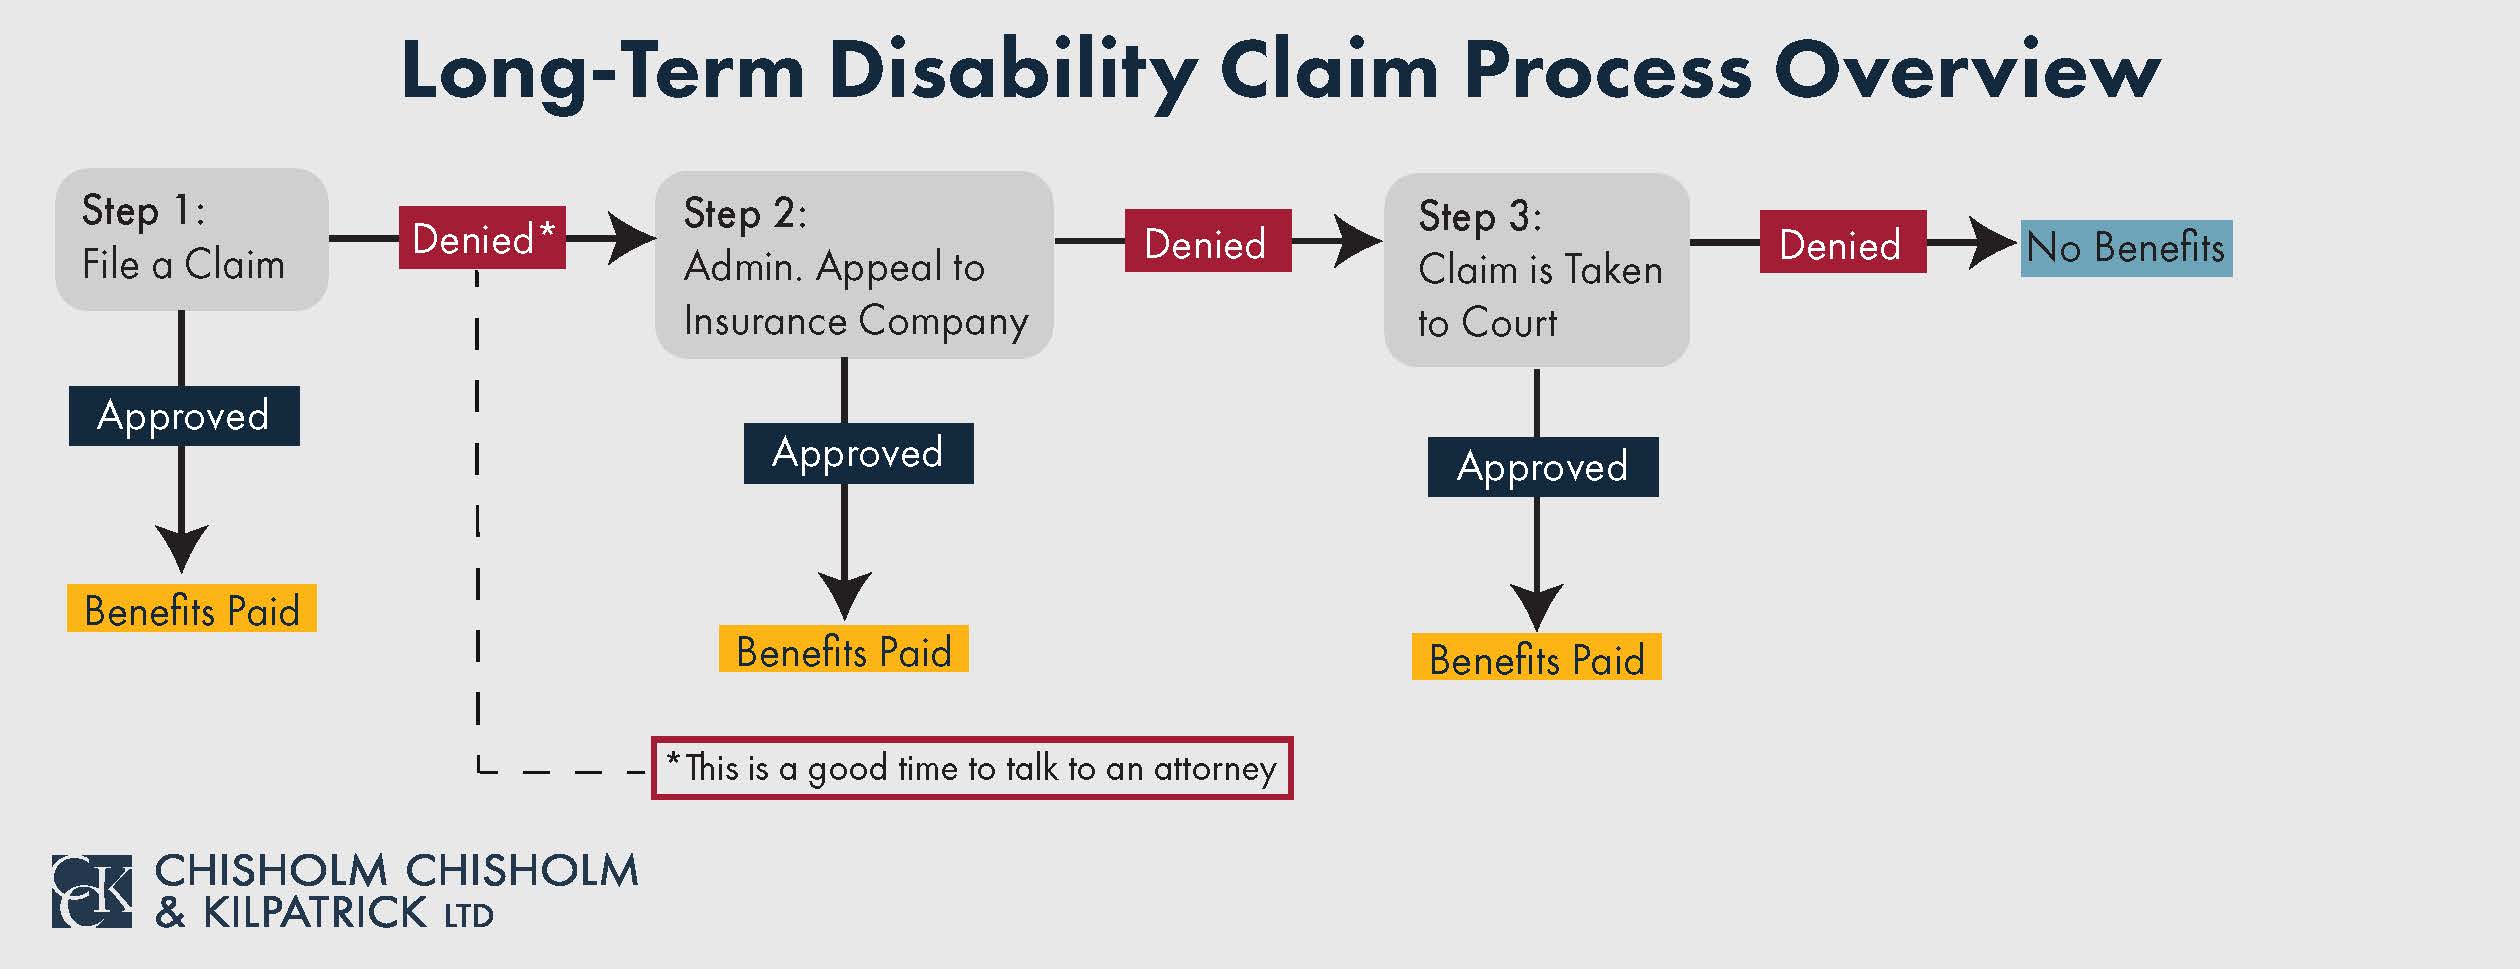 Long-Term Disability claims and appeals process flowchart